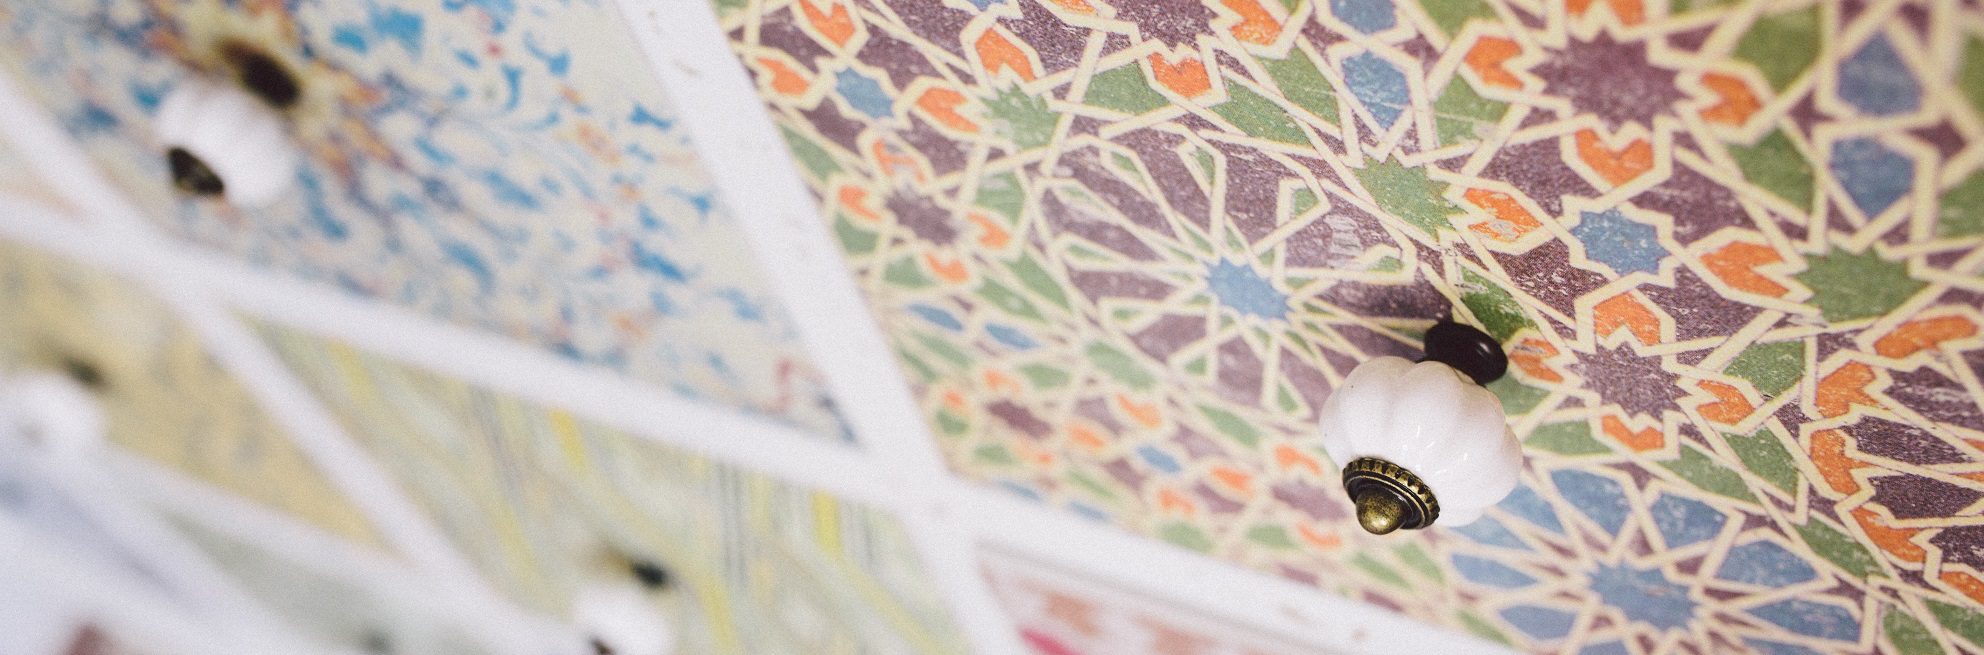 Close-up of colourful drawers with green, purple and orange design